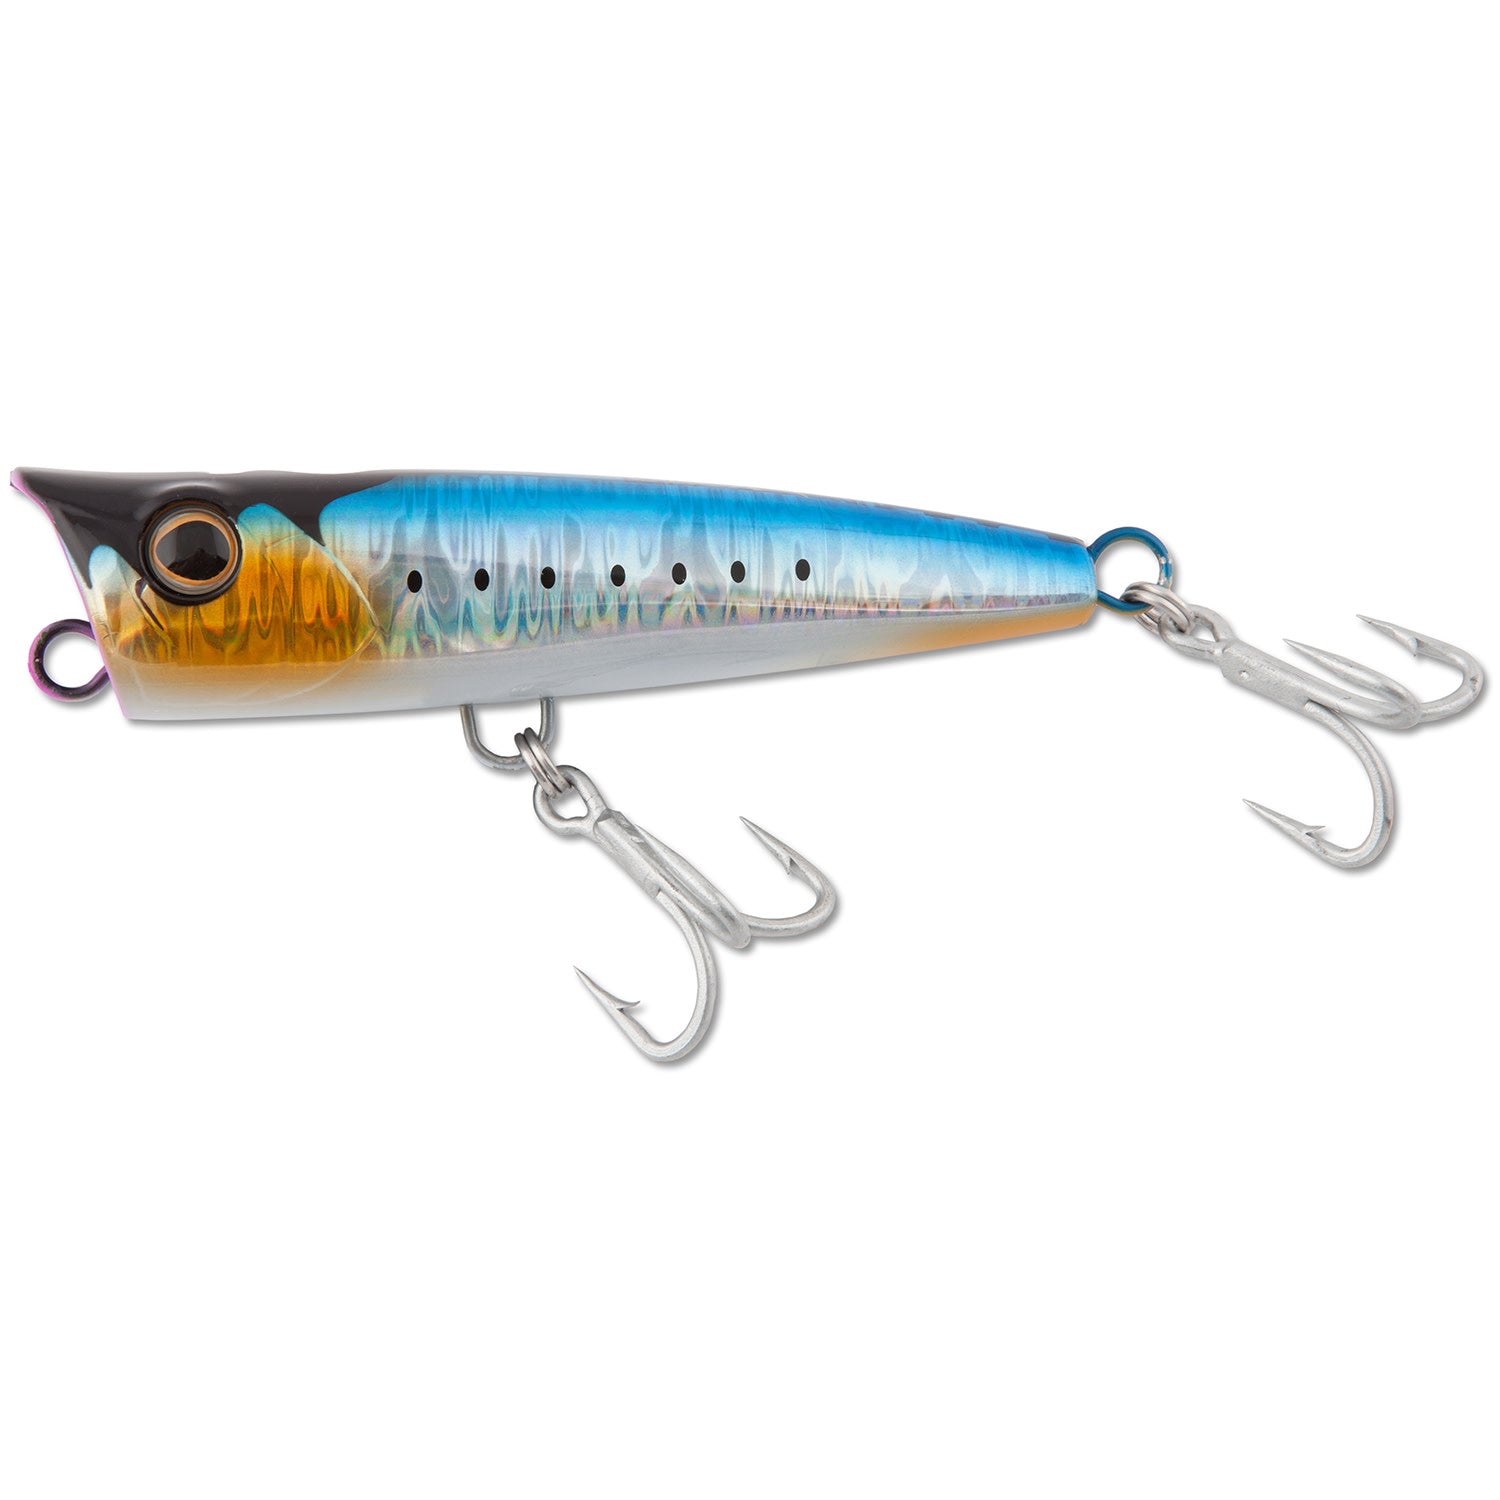 Popper lures and surface lures